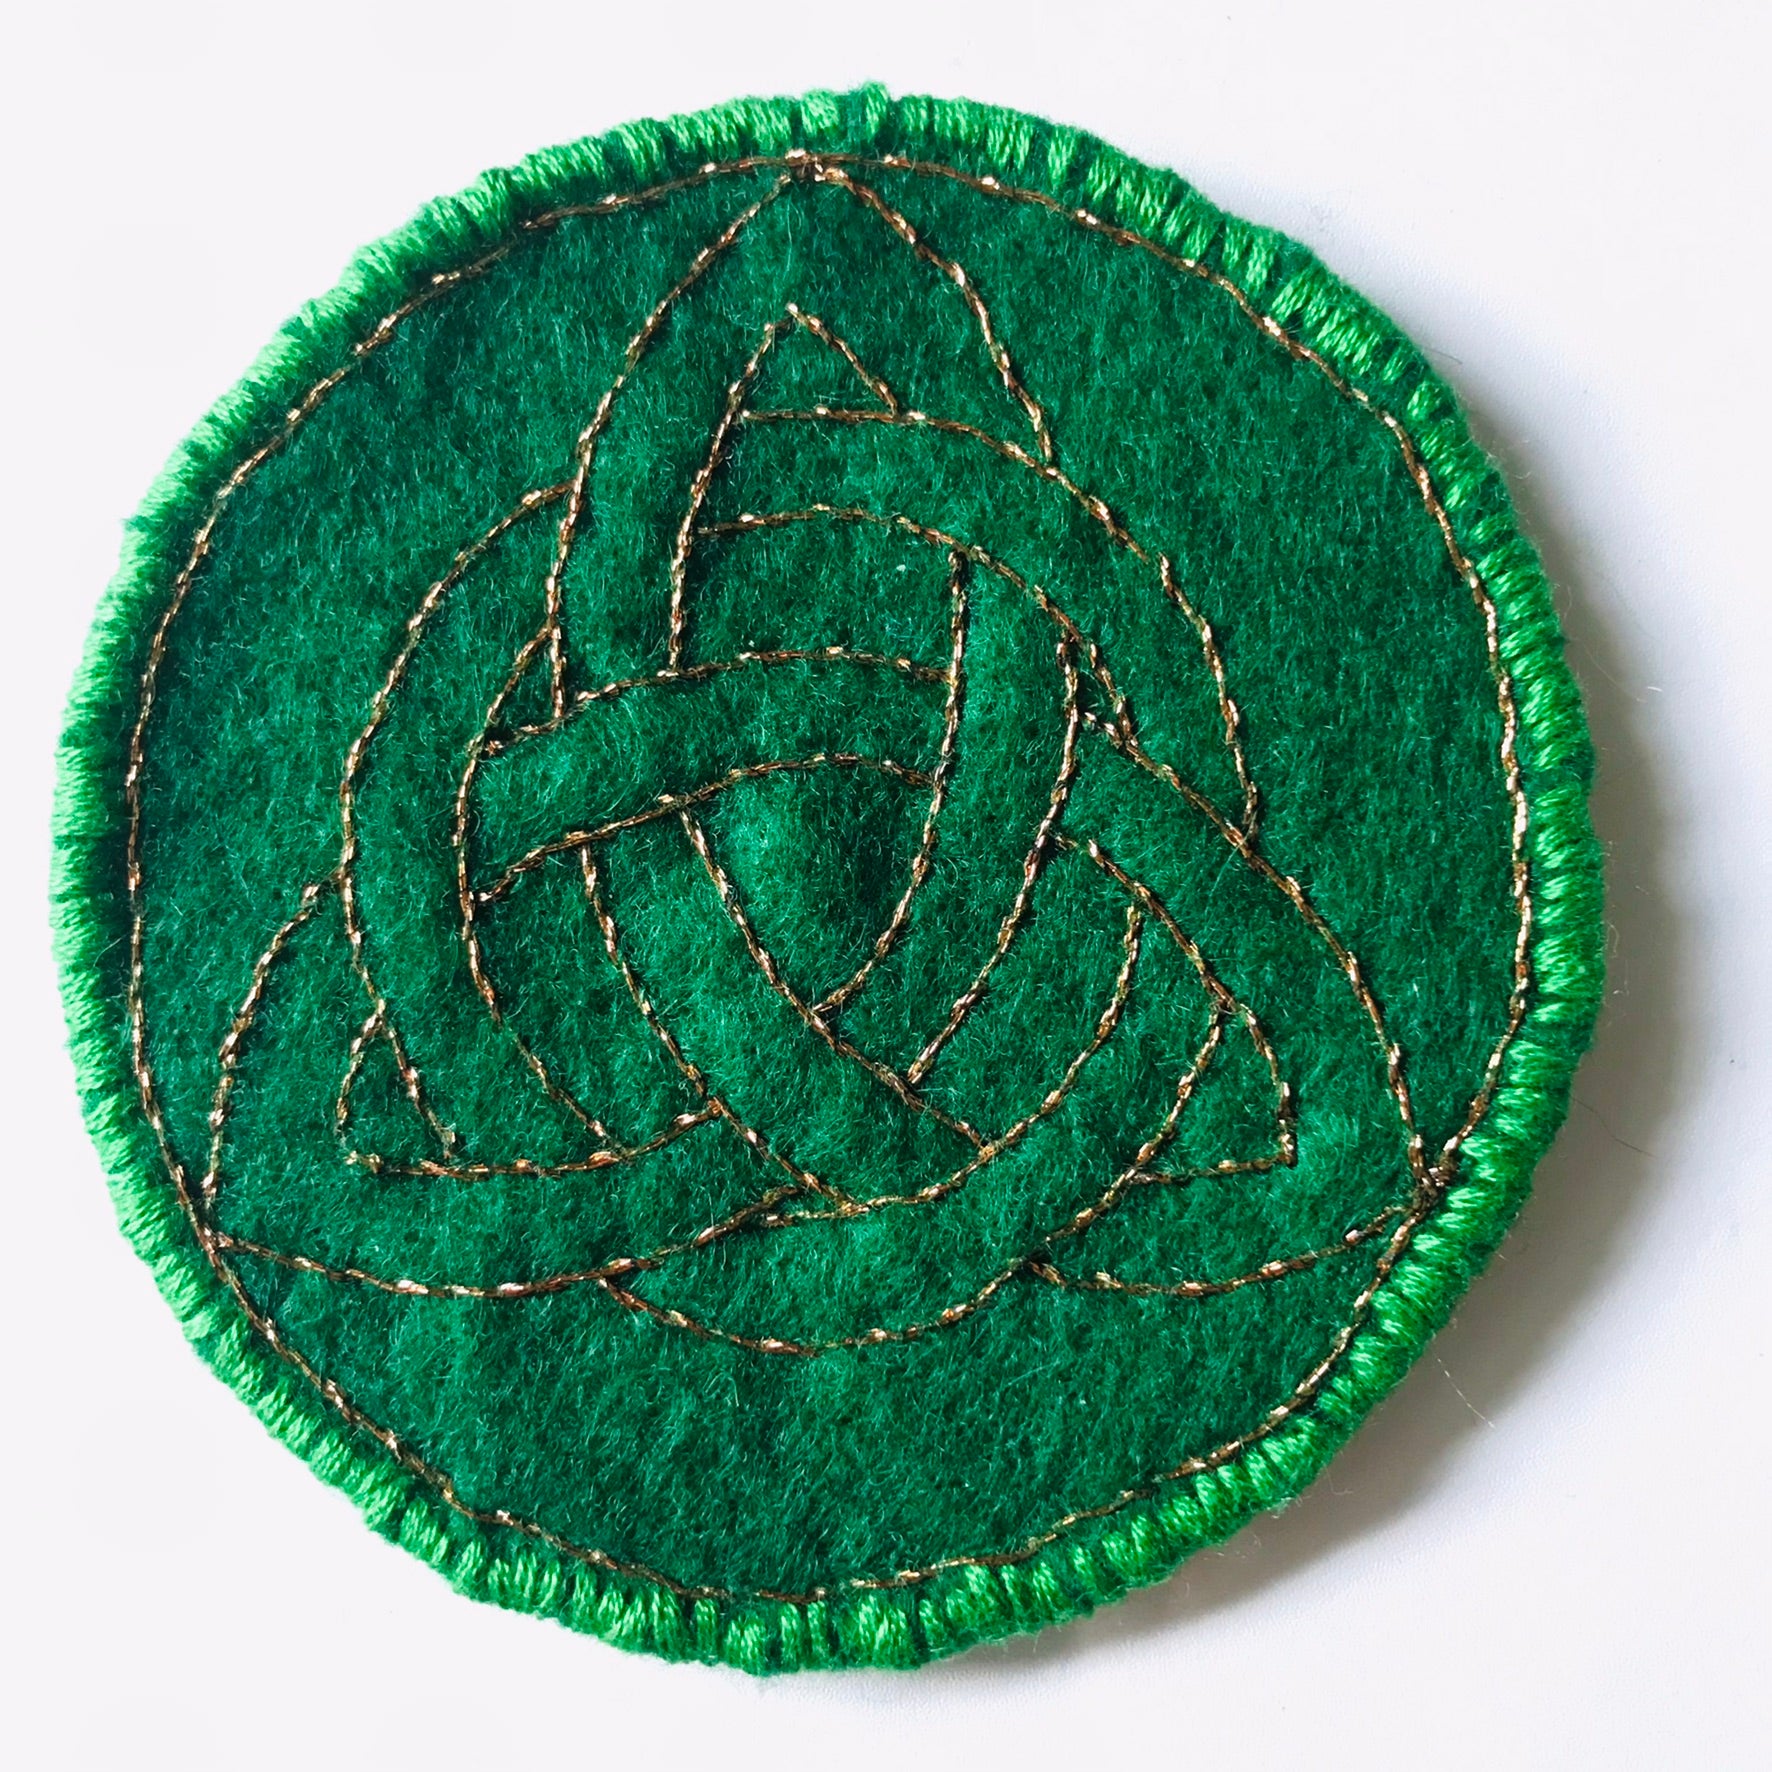 TRIQUETRA, GREEN FELT & COPPER METAL THREAD EMBROIDERED PROTECTION PATCHES, MINI TRAVEL CRYSTAL CHARGERS, ALTER PIECES